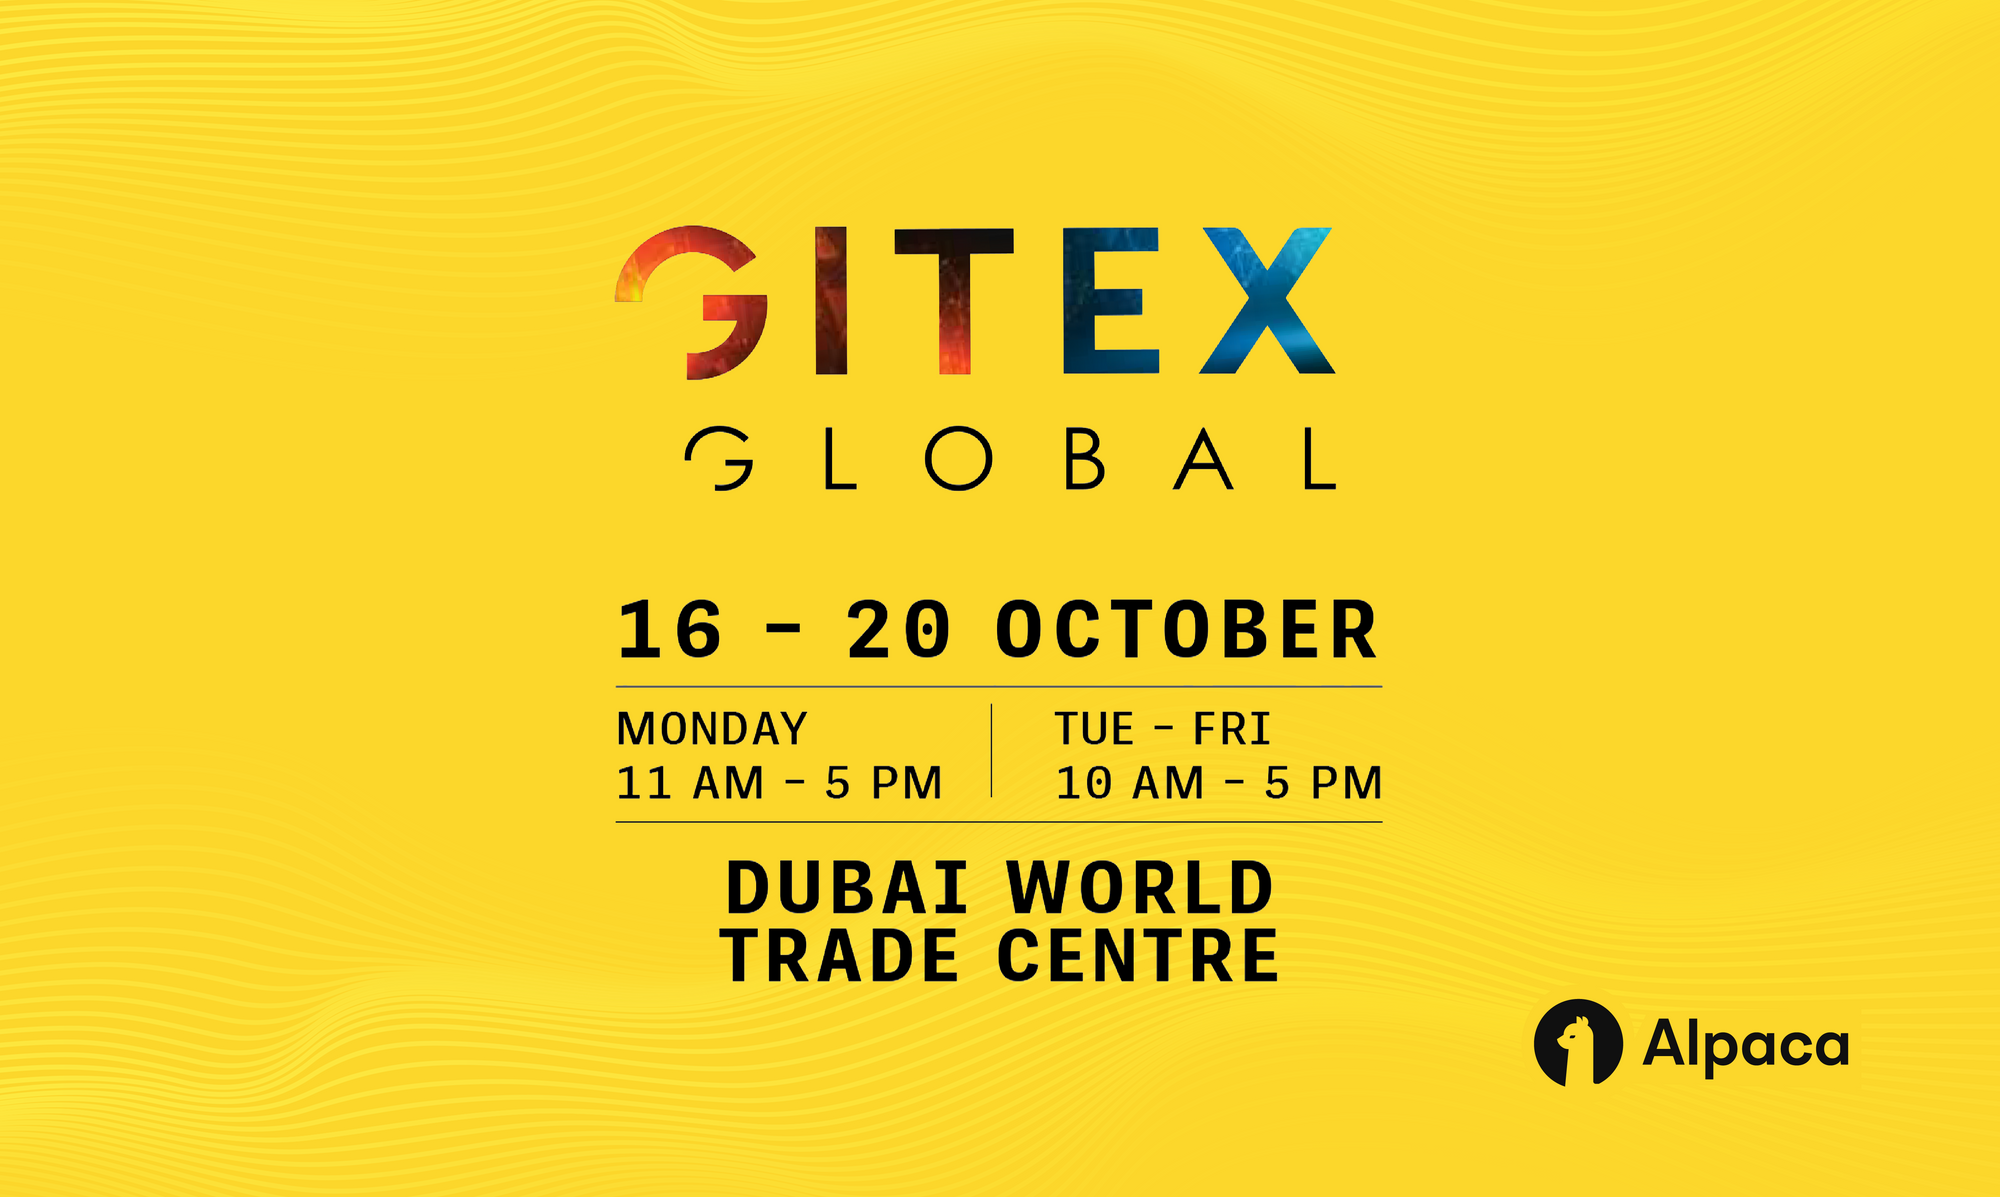 Alpaca Partners with GITEX GLOBAL for the Tech Event of the Year in 2023